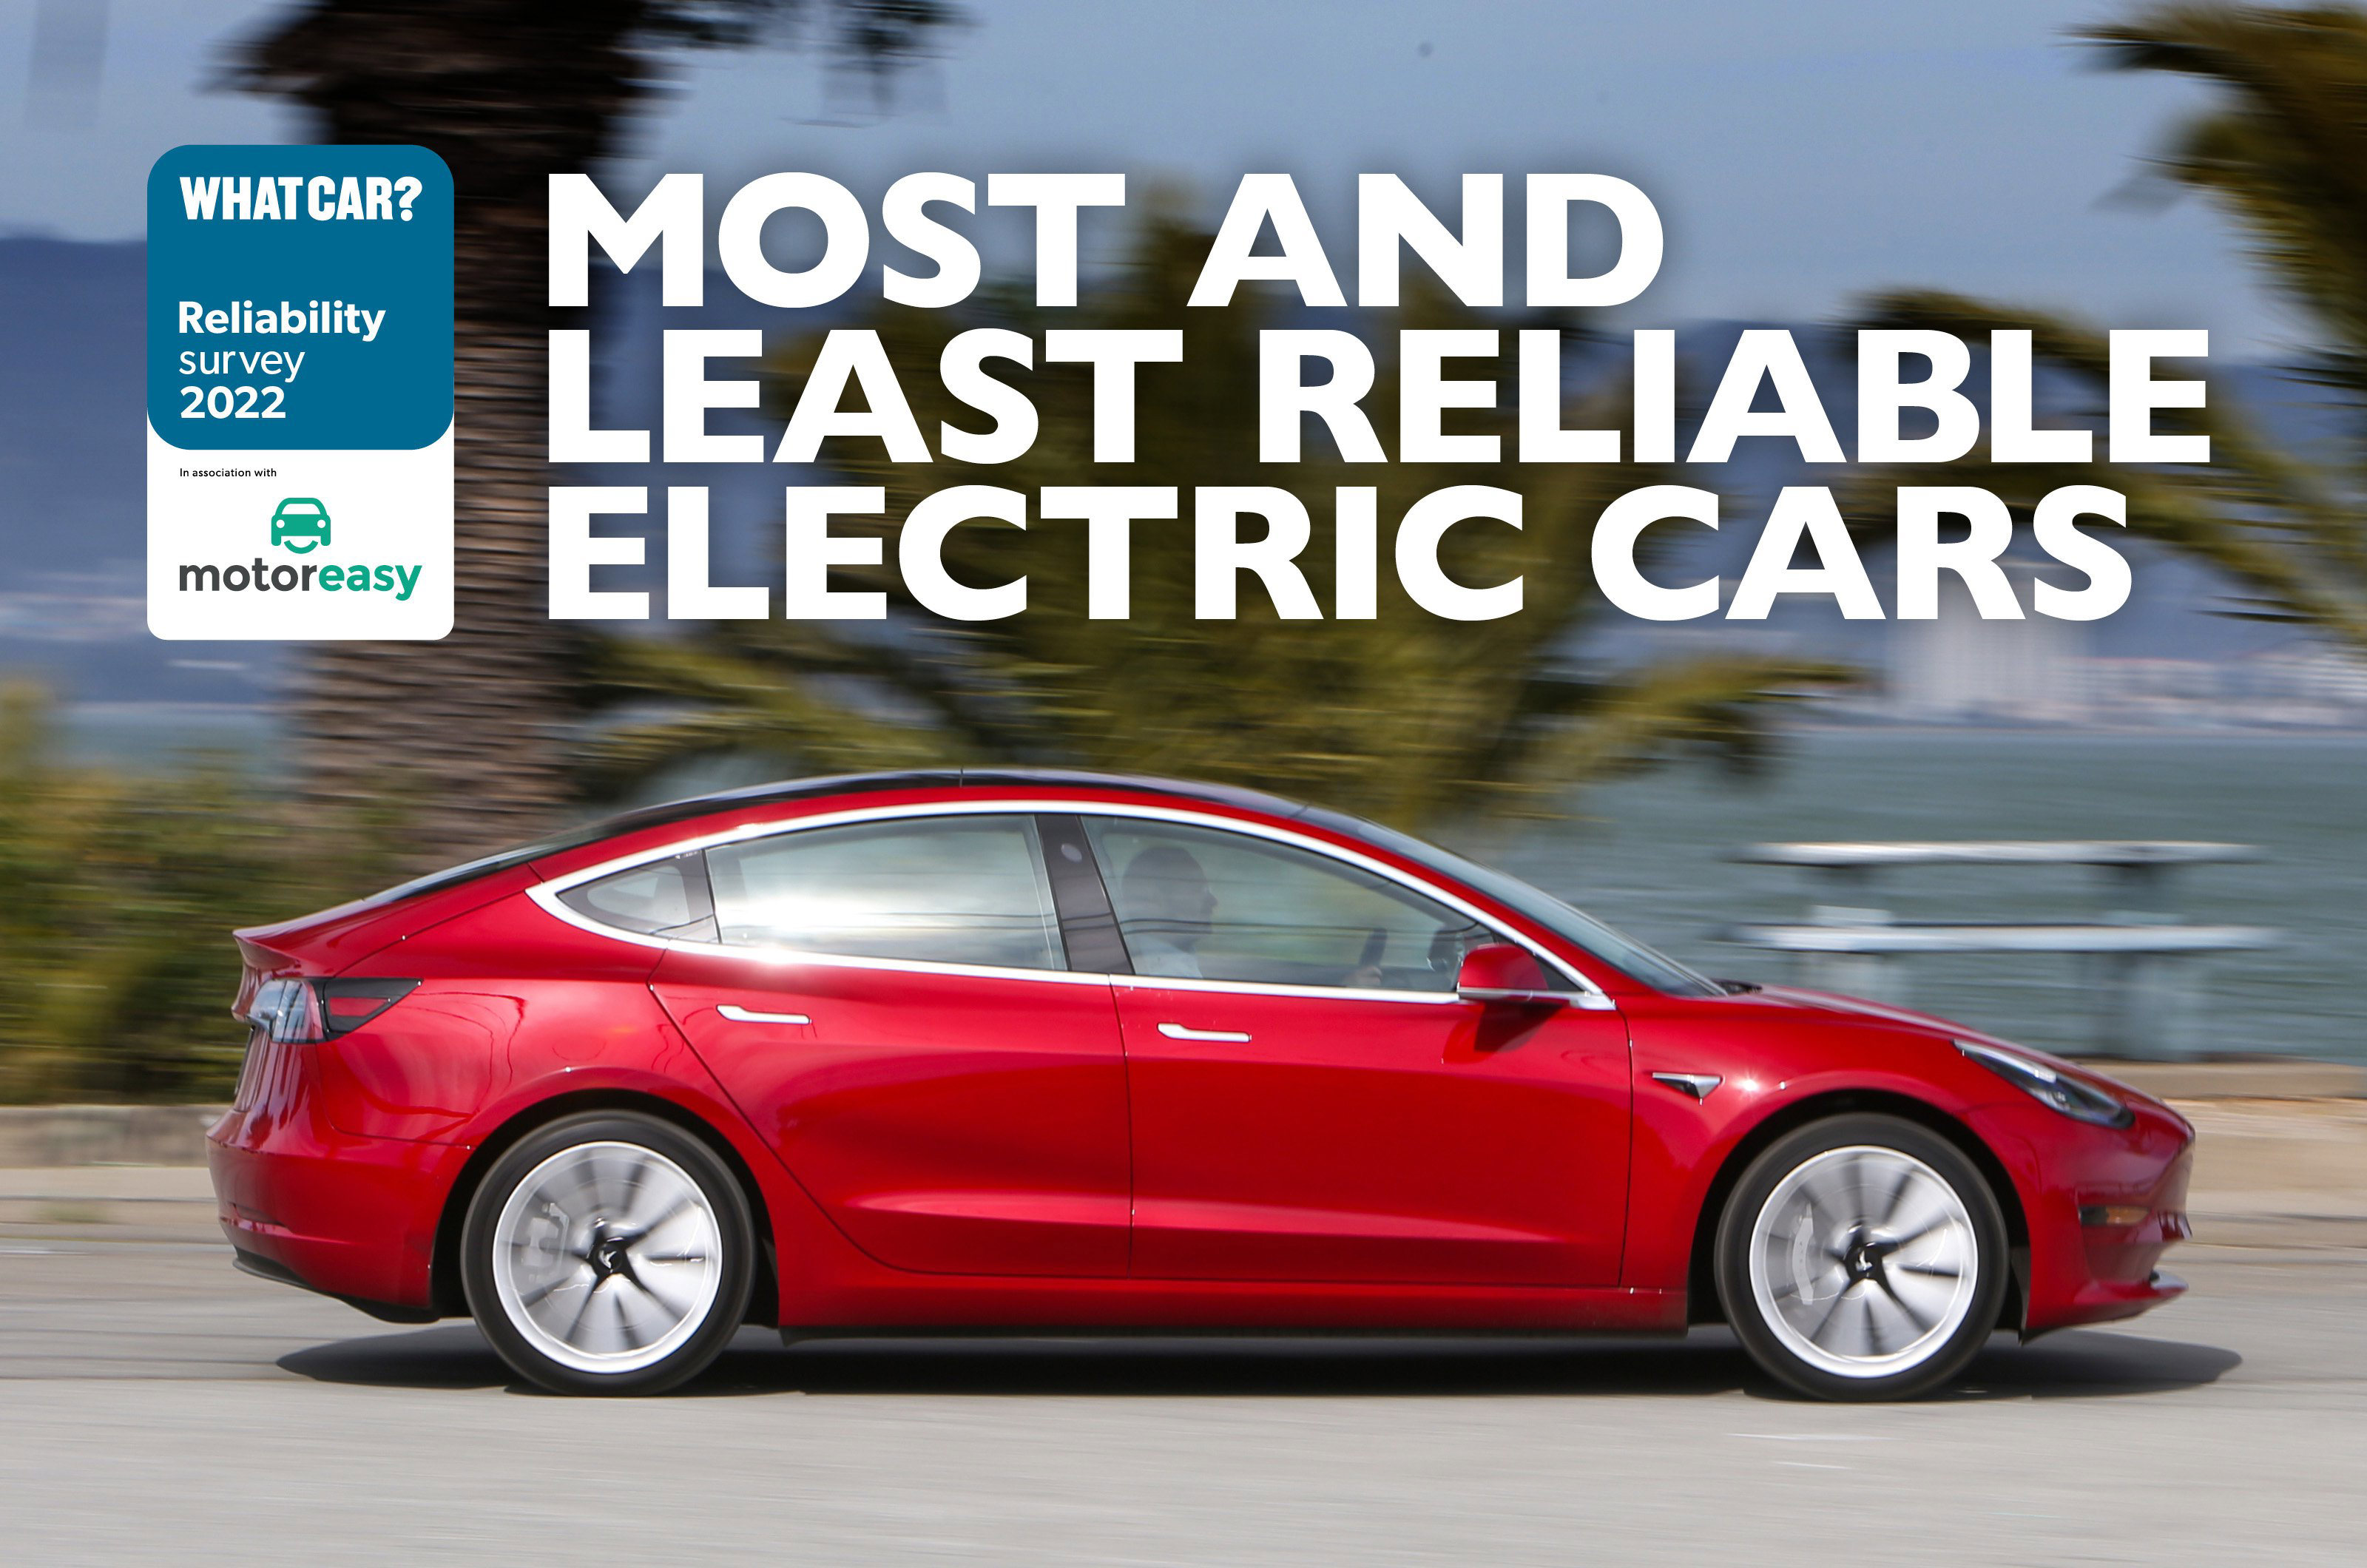 The most reliable electric cars and the least